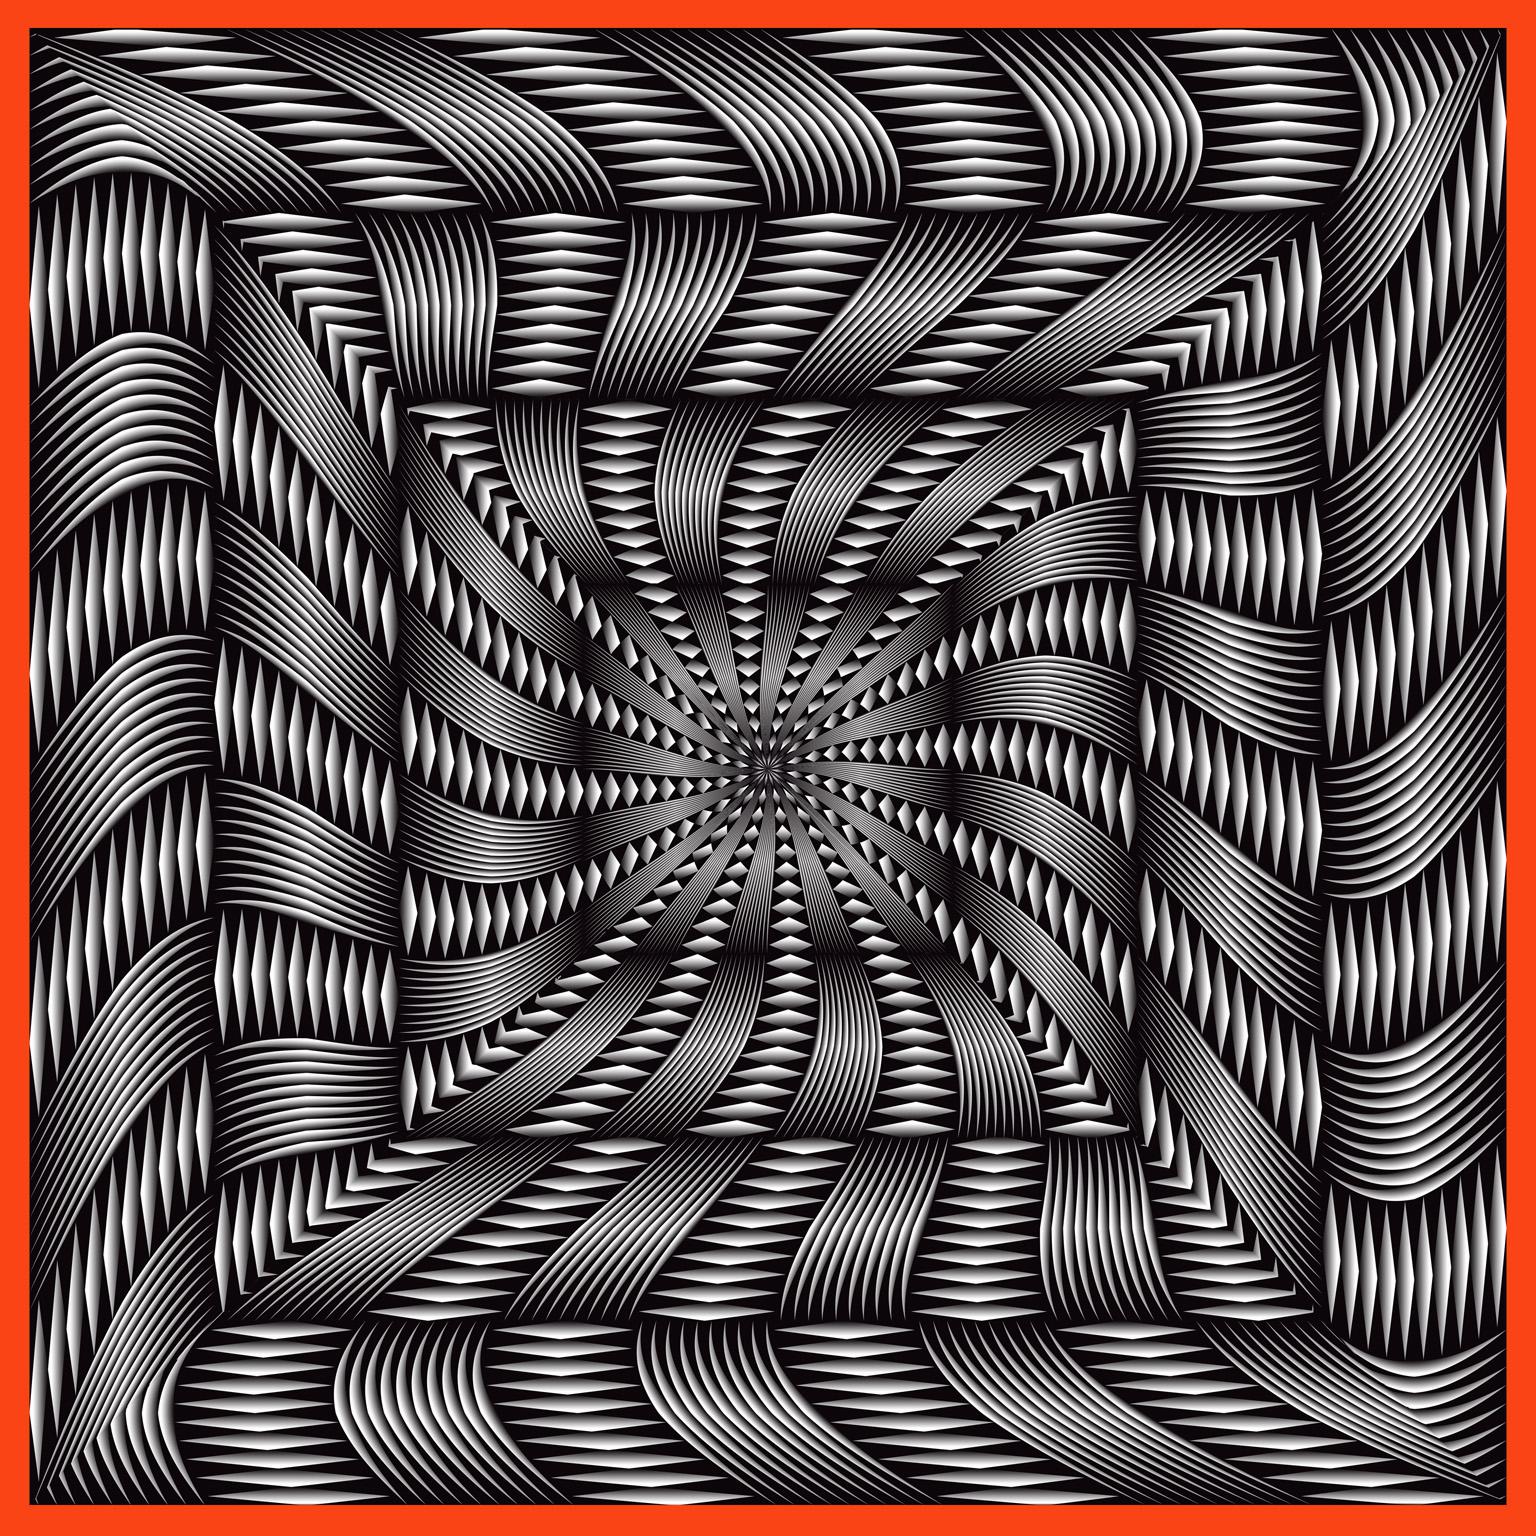 Untitled - Black and White Op Art Print with Red Frame